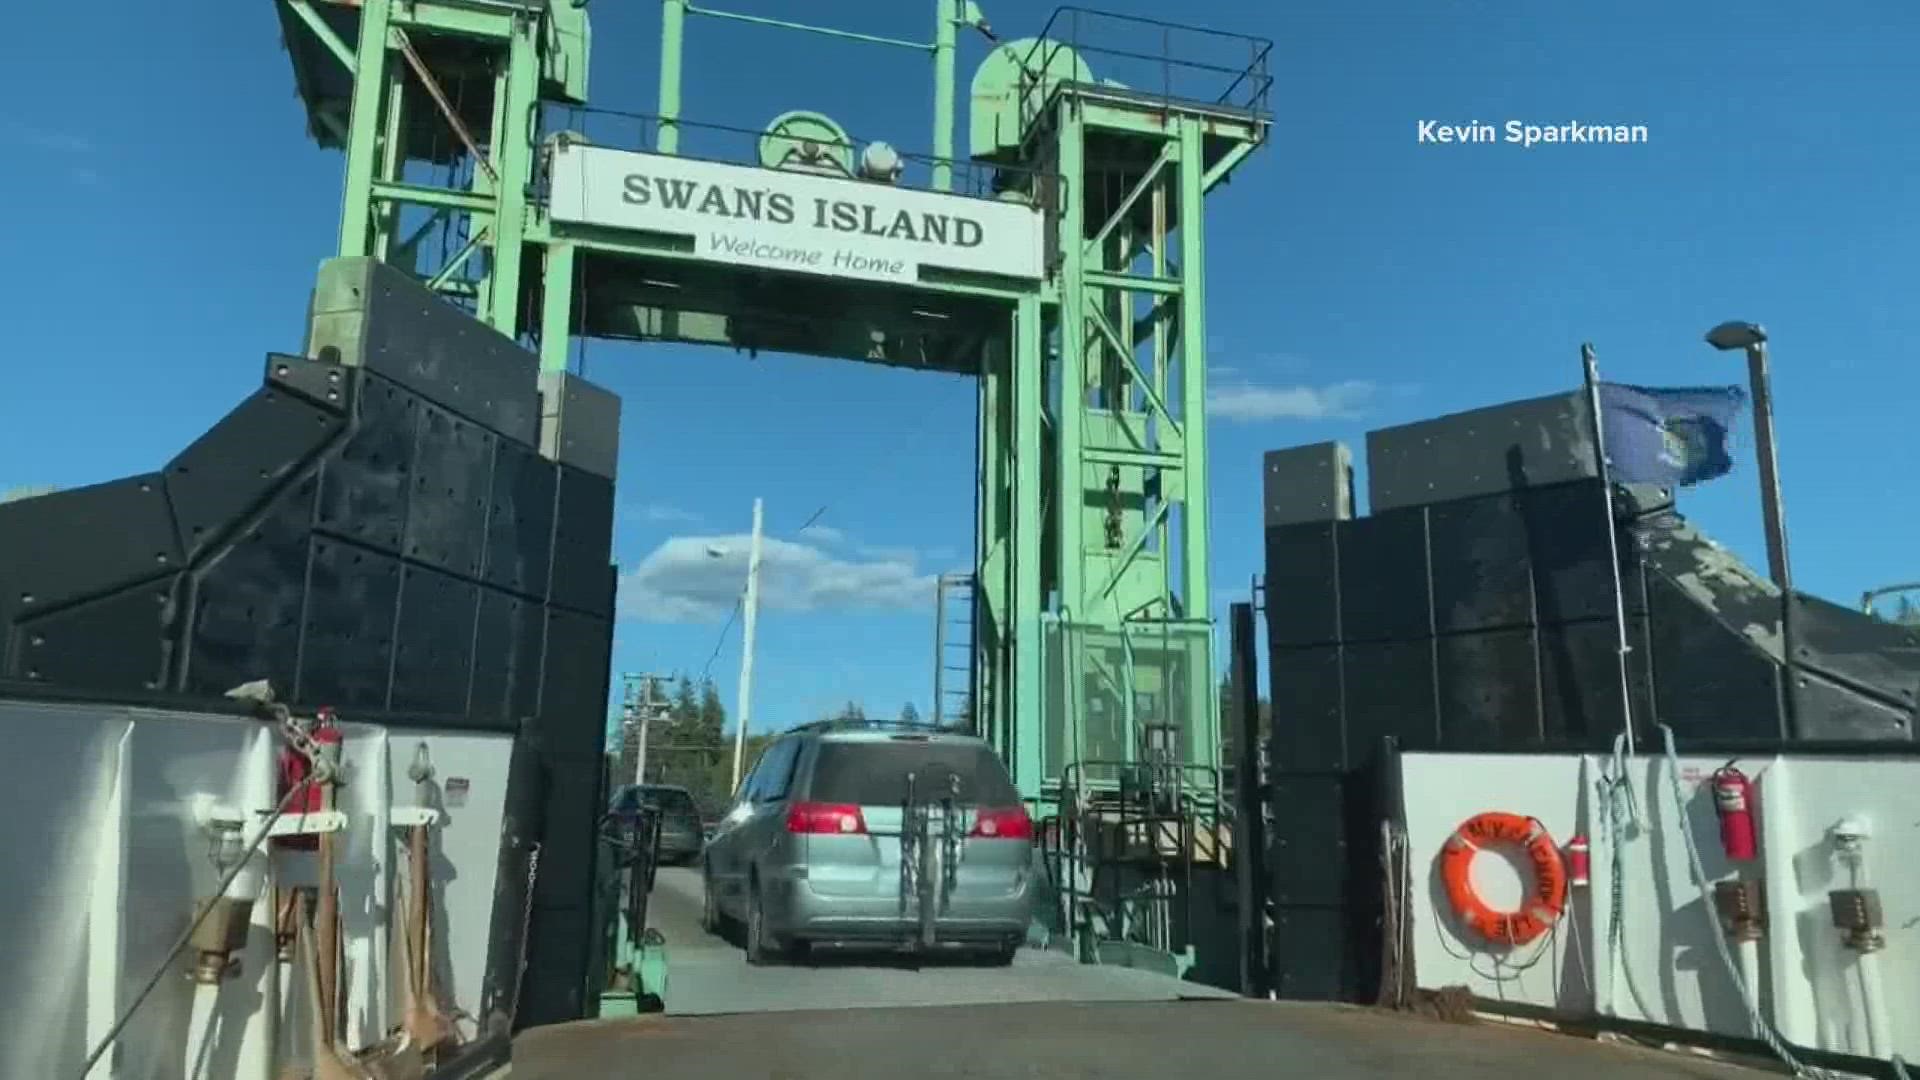 Access to Swan's Island has been limited since a recent winter storm damaged a part of the Island's ferry system.